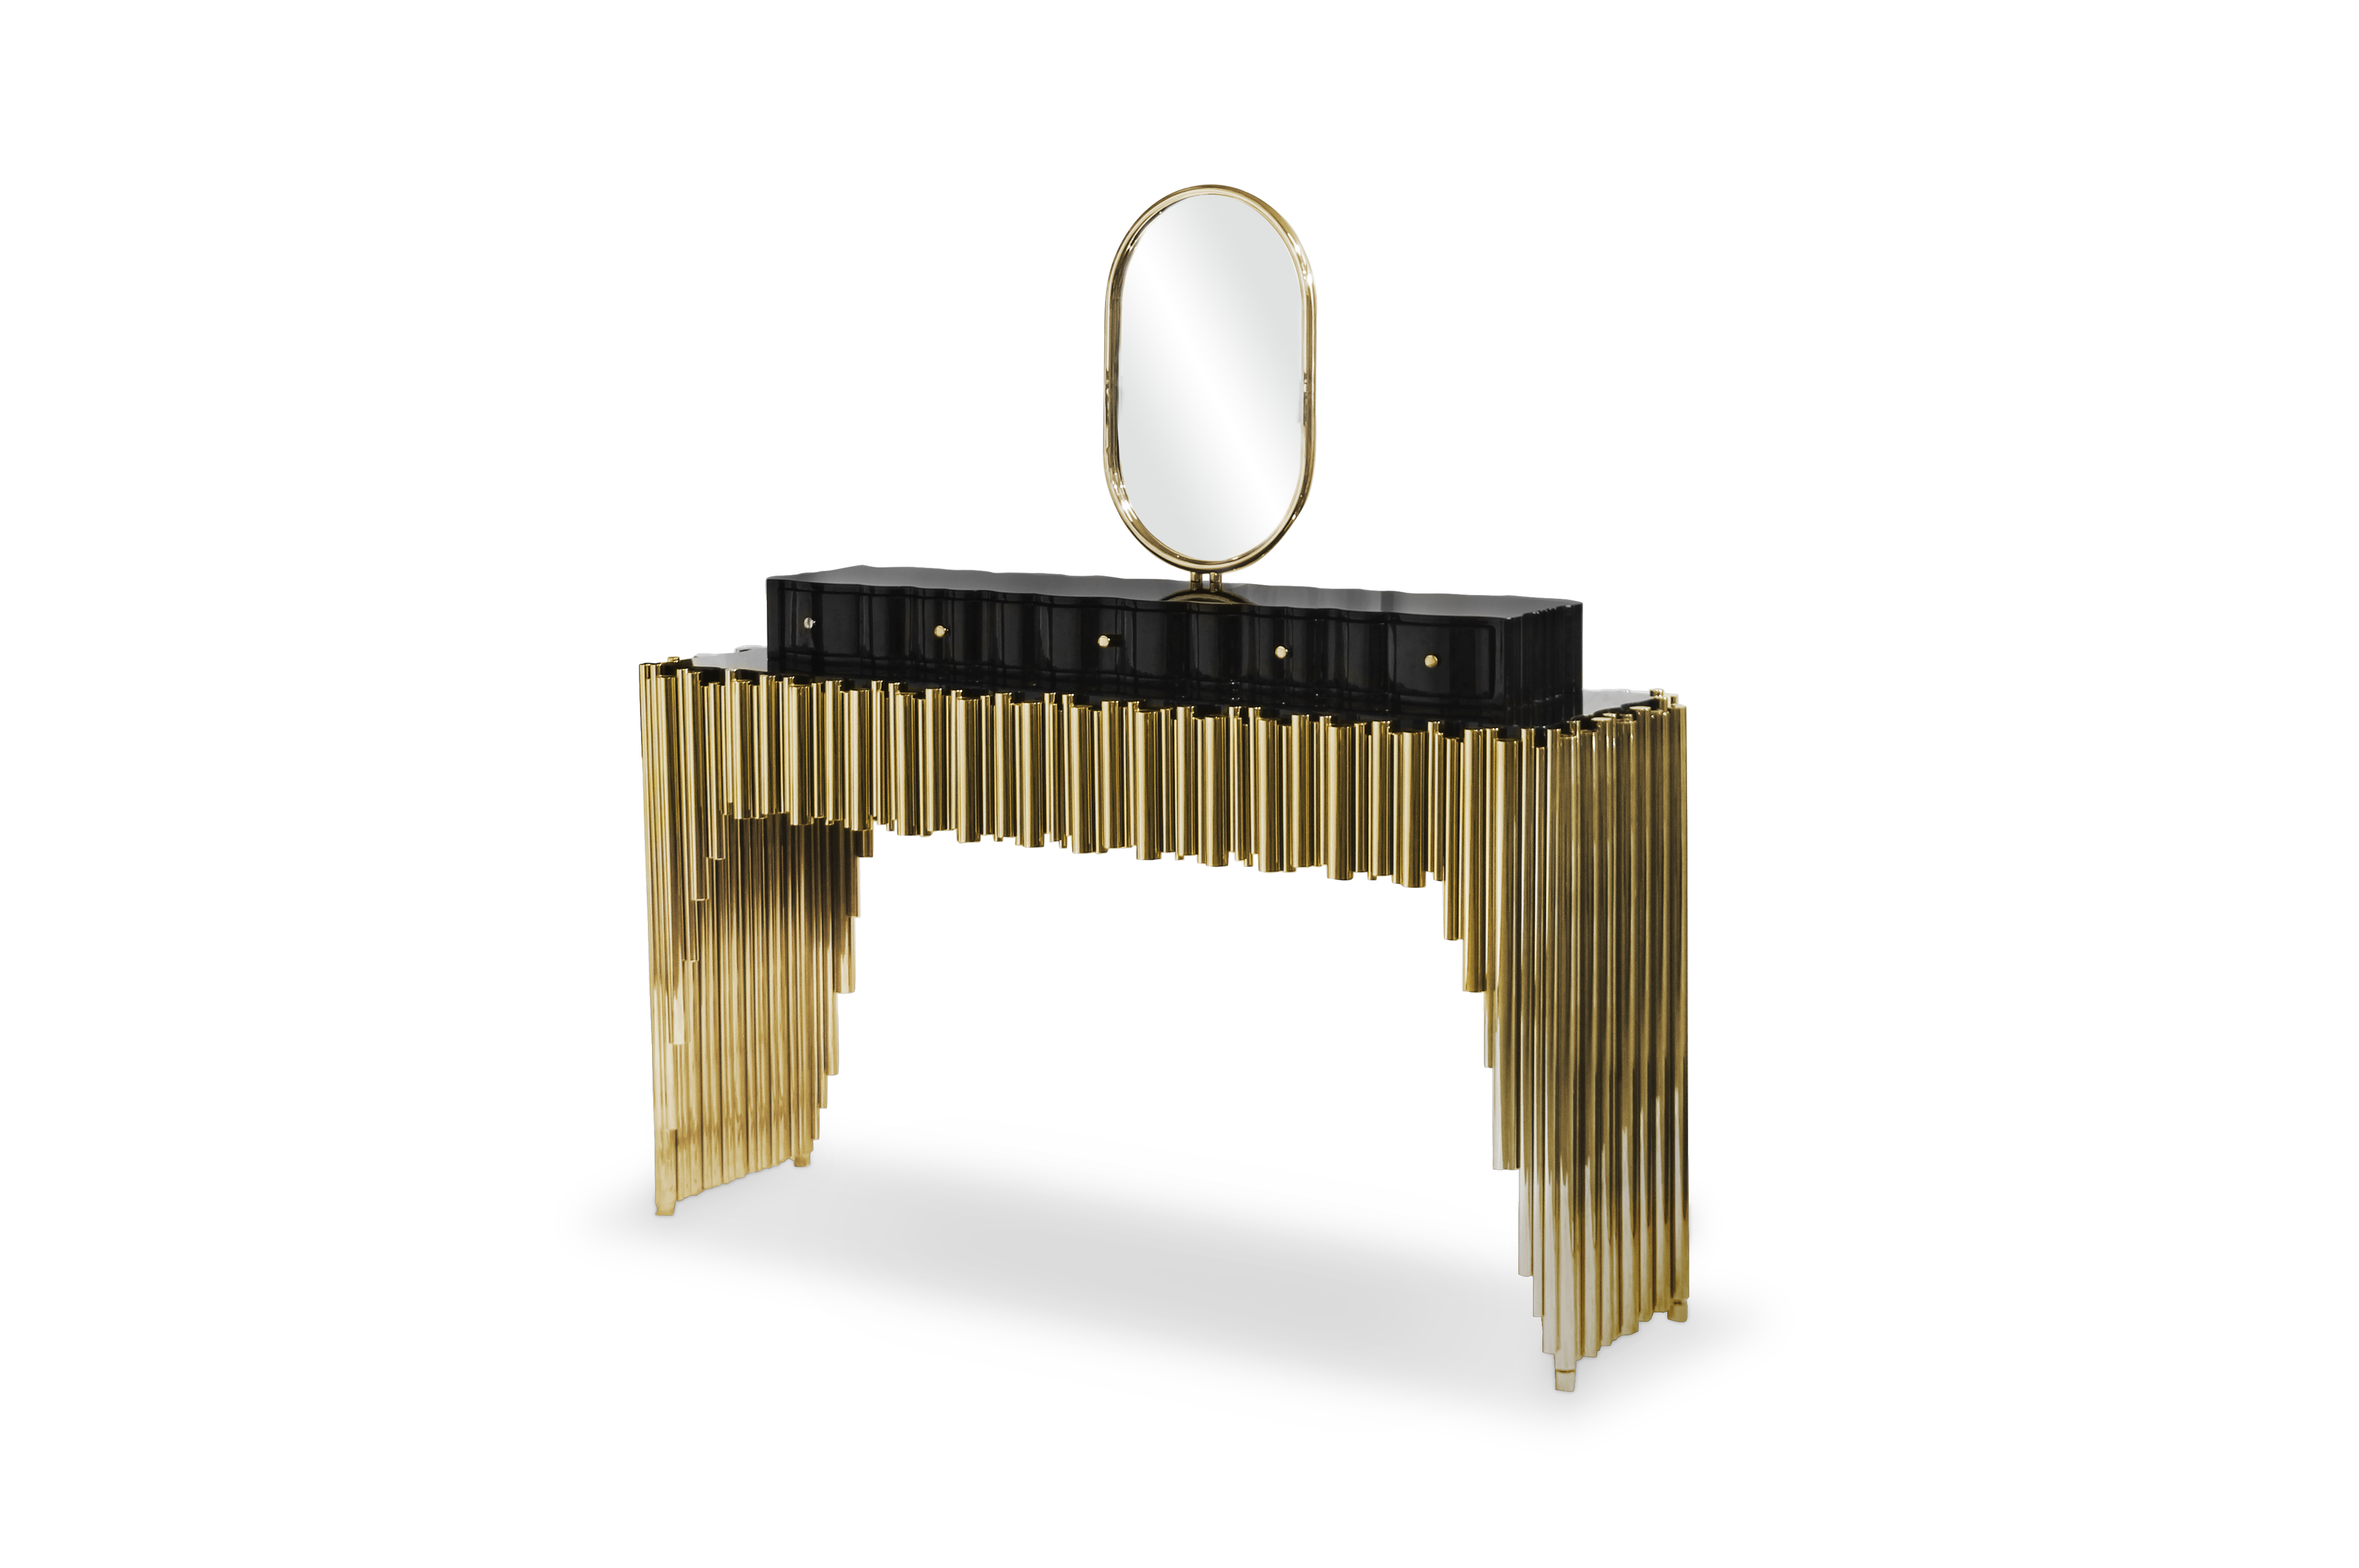 Introducing Glamorous Vanity Tables To Master Bedrooms vanity tables Introducing Glamorous Vanity Tables To Master Bedrooms symphony dressing table 2 HR